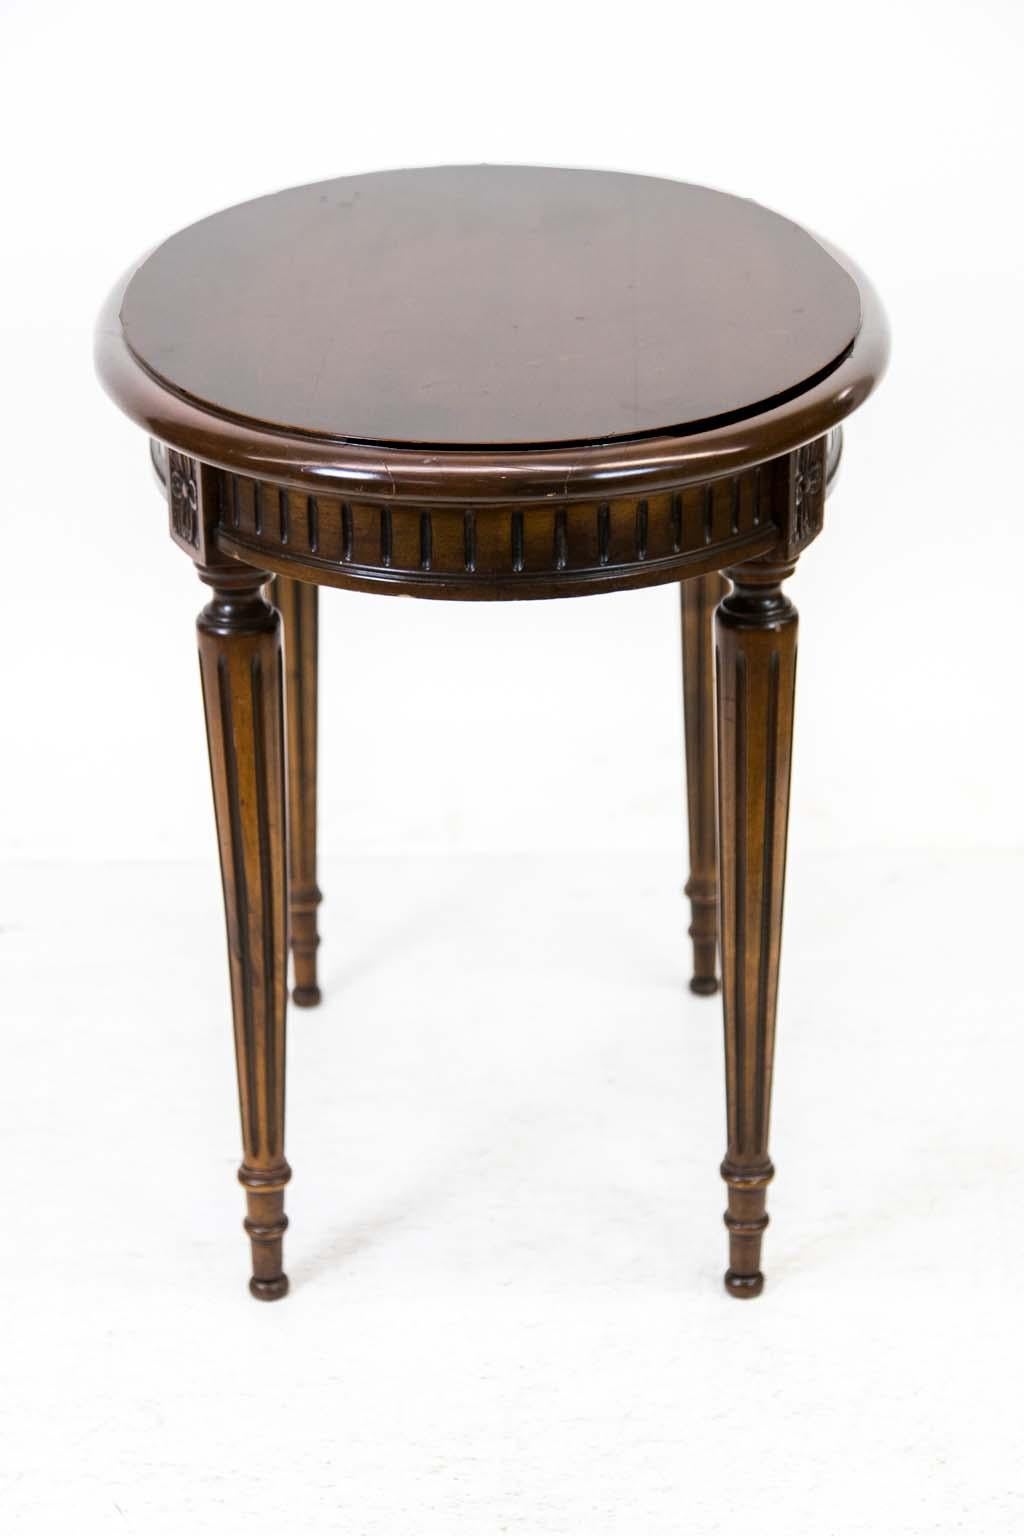 This walnut oval center table has a bull nosed edge molding with a fluted apron and legs that are also fluted. There is a carved floral panel at the top of the apron. The top finish has noticeable crazing.
  